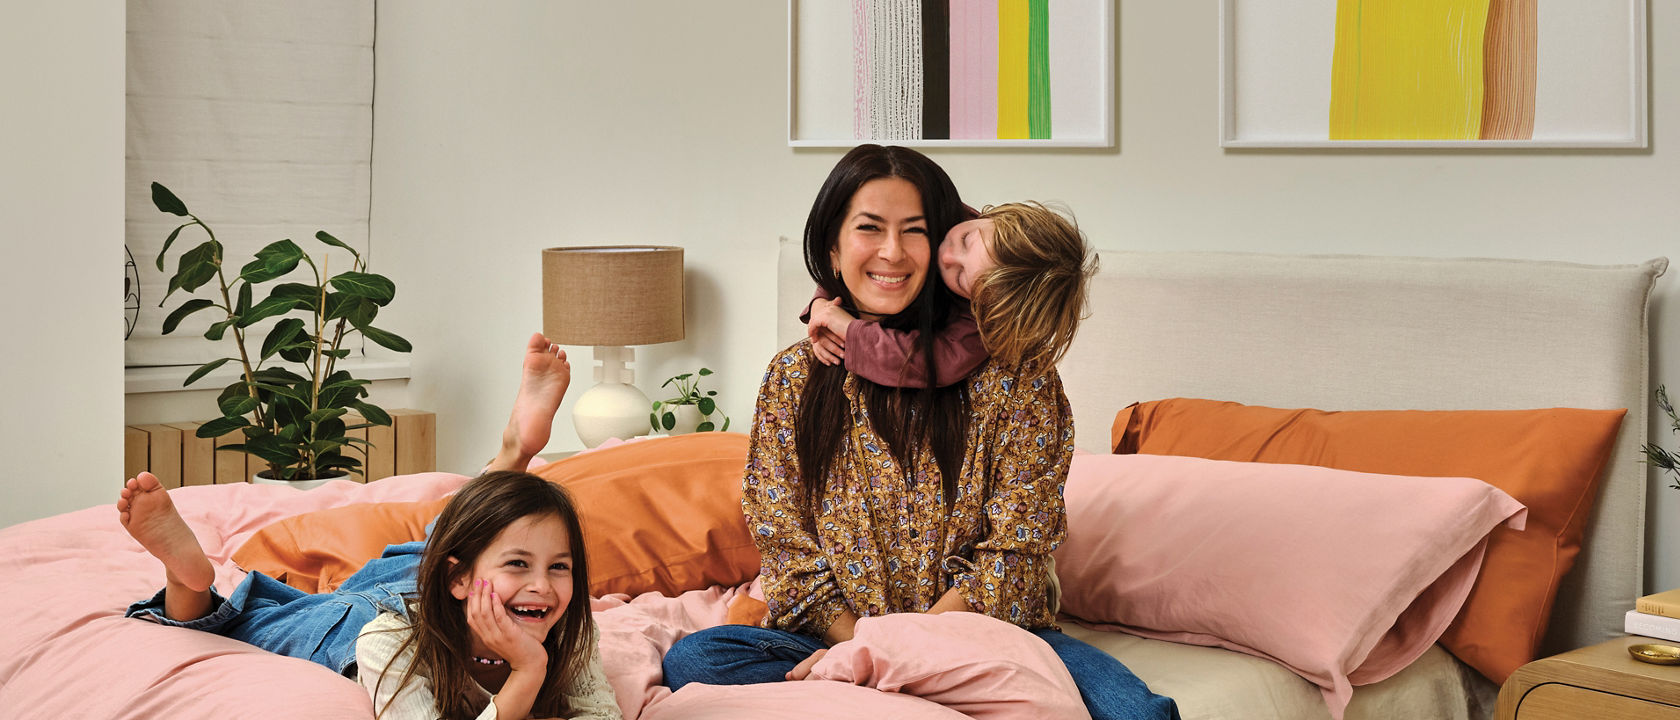 Rebecca Minkoff and her kids posing in a colorful bedroom.